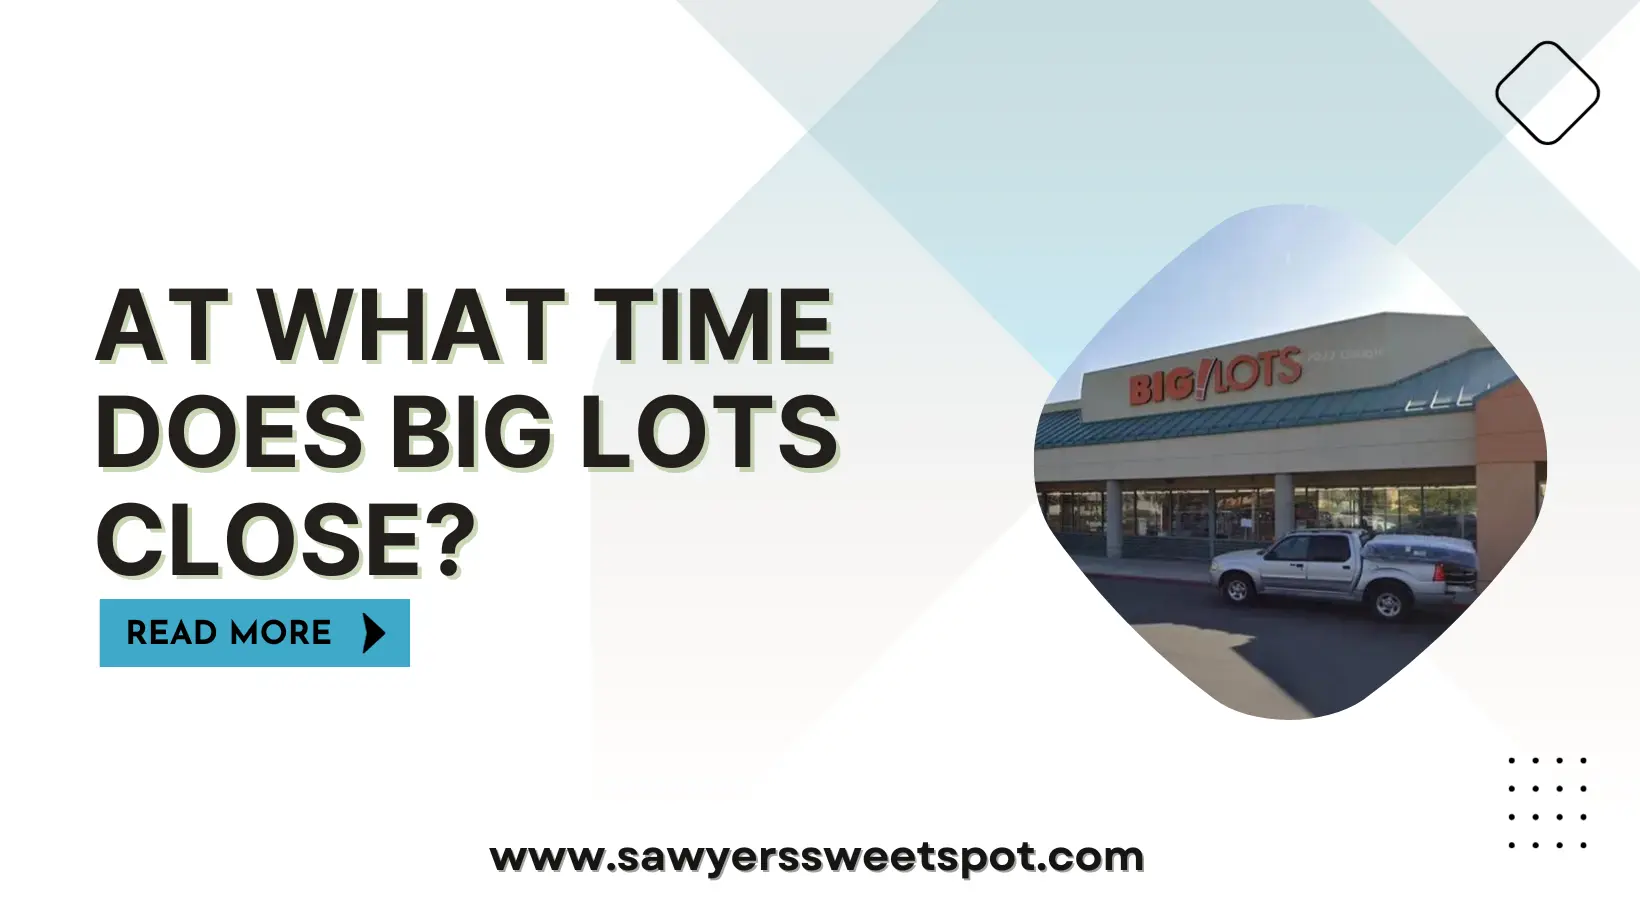 At What Time Does Big Lots Close?